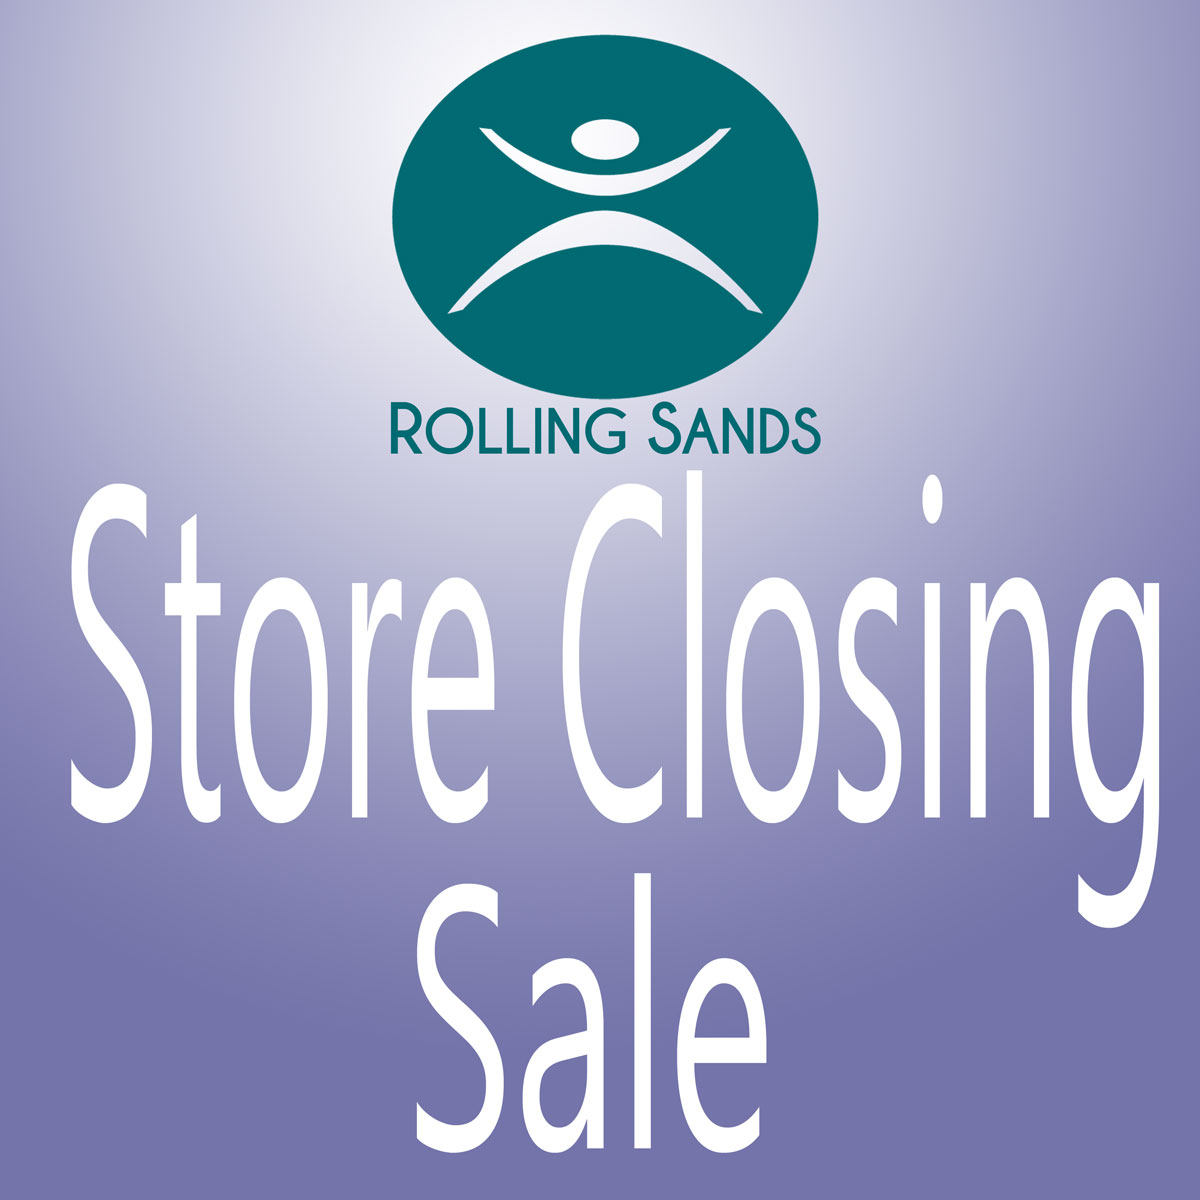 Rolling Sands Store Closing